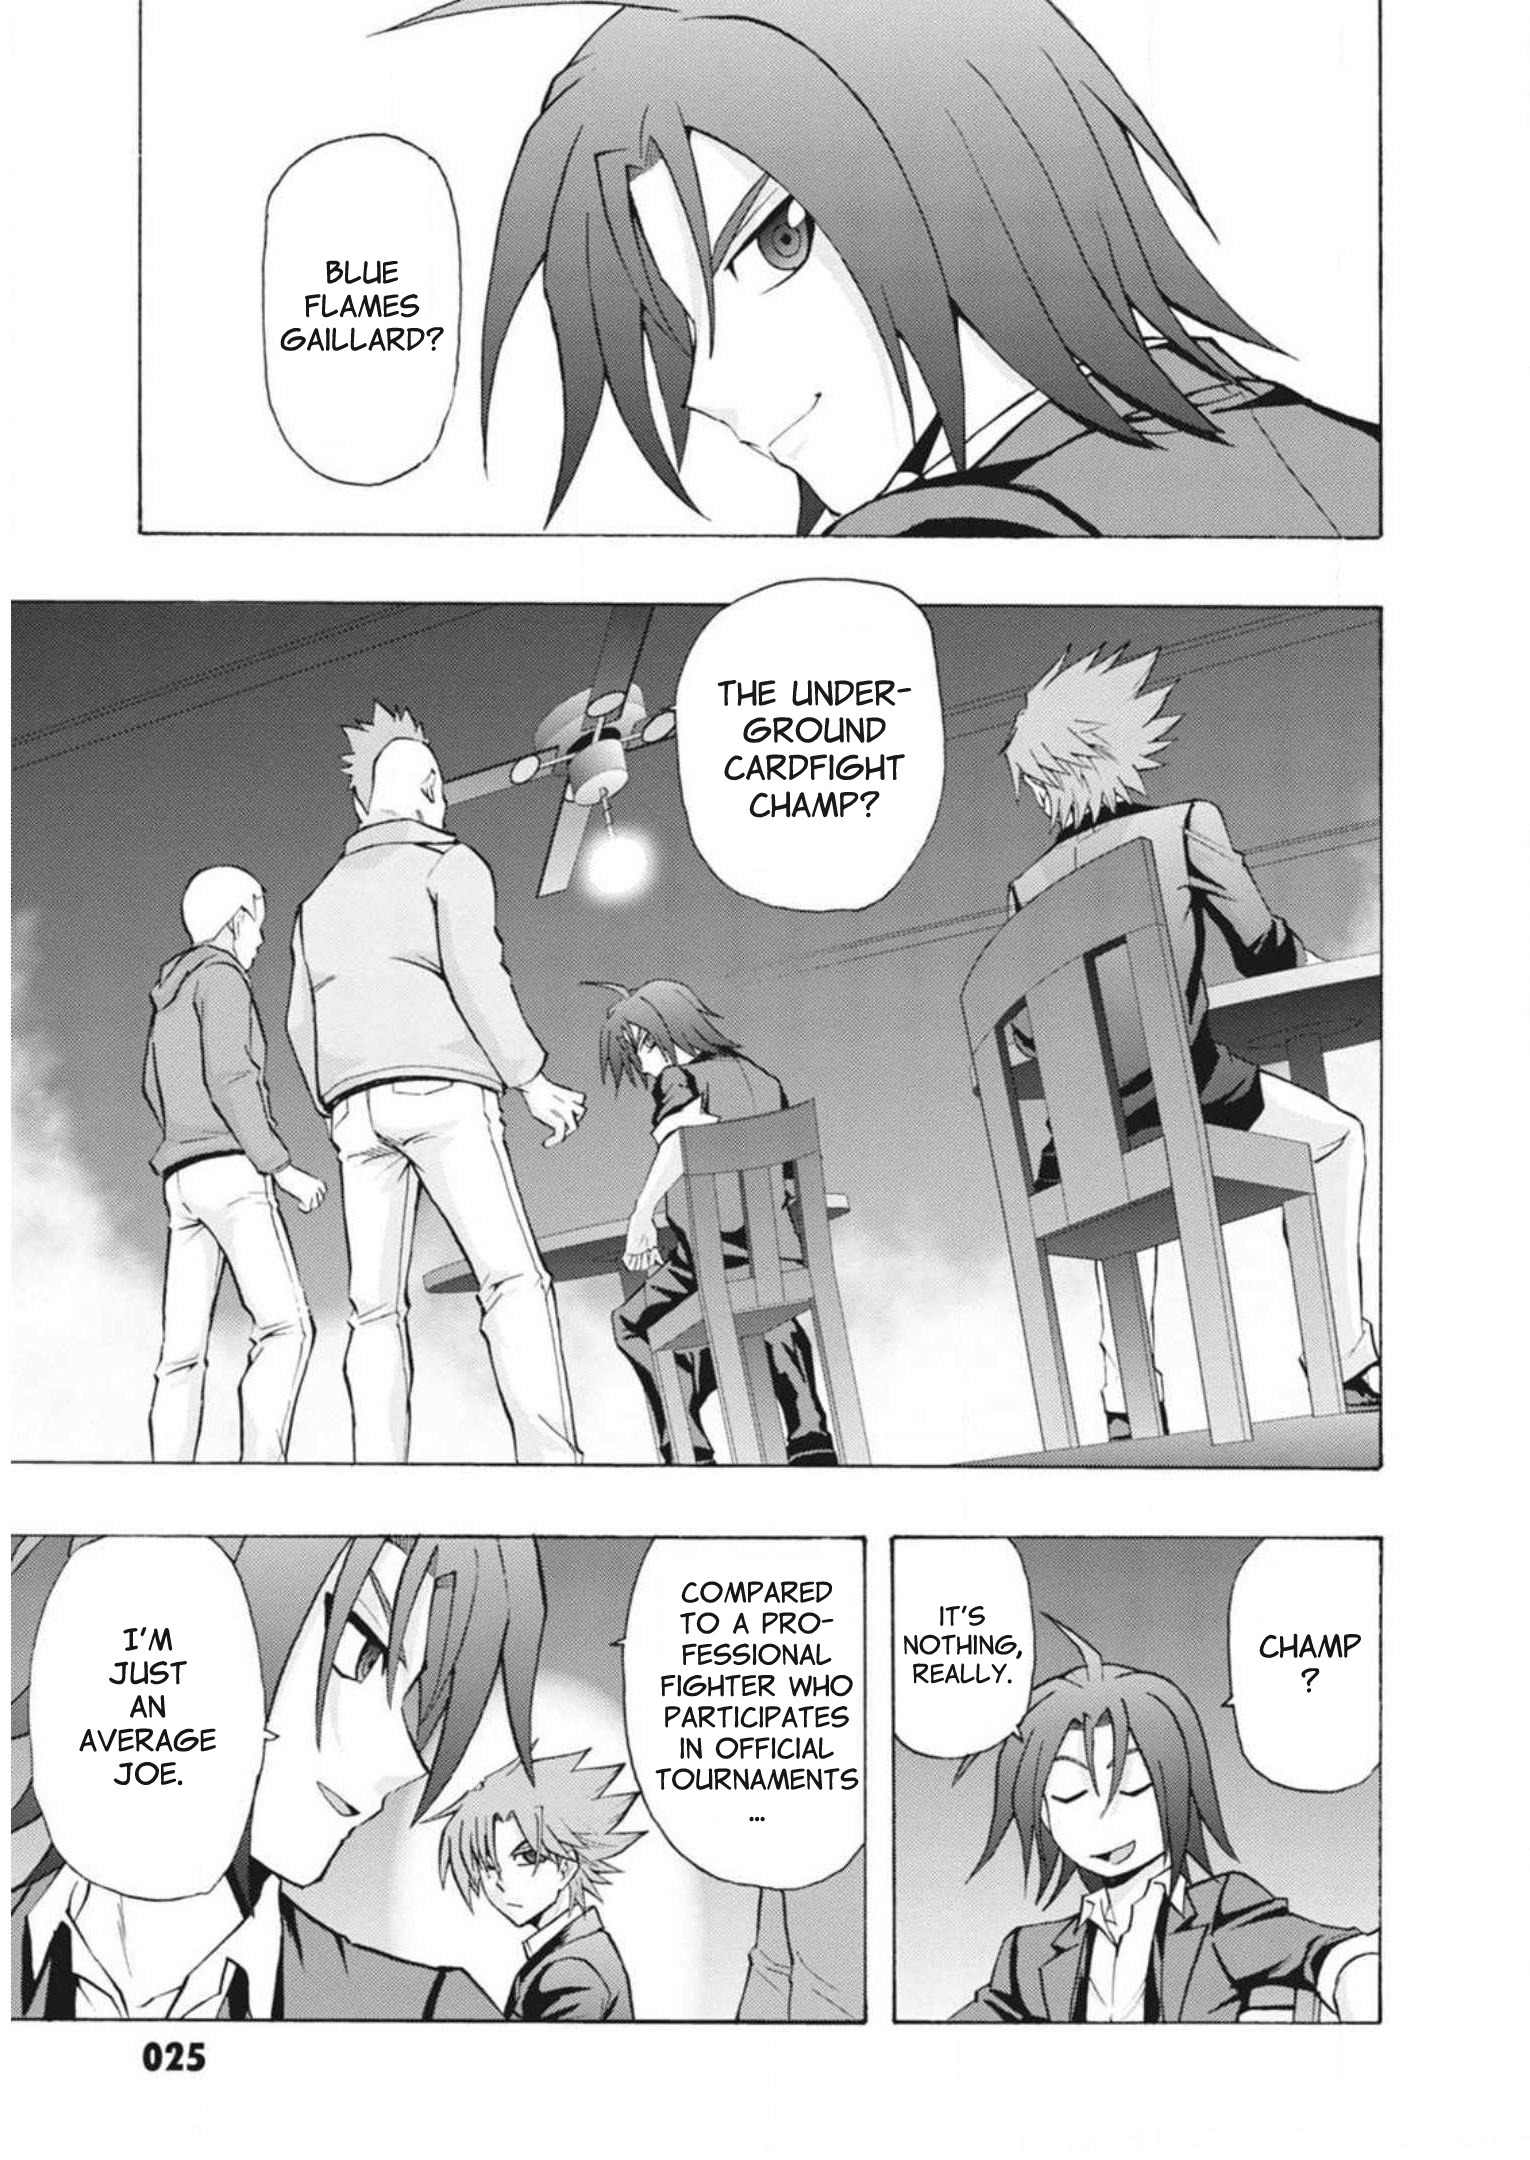 Cardfight!! Vanguard: Turnabout - Page 1